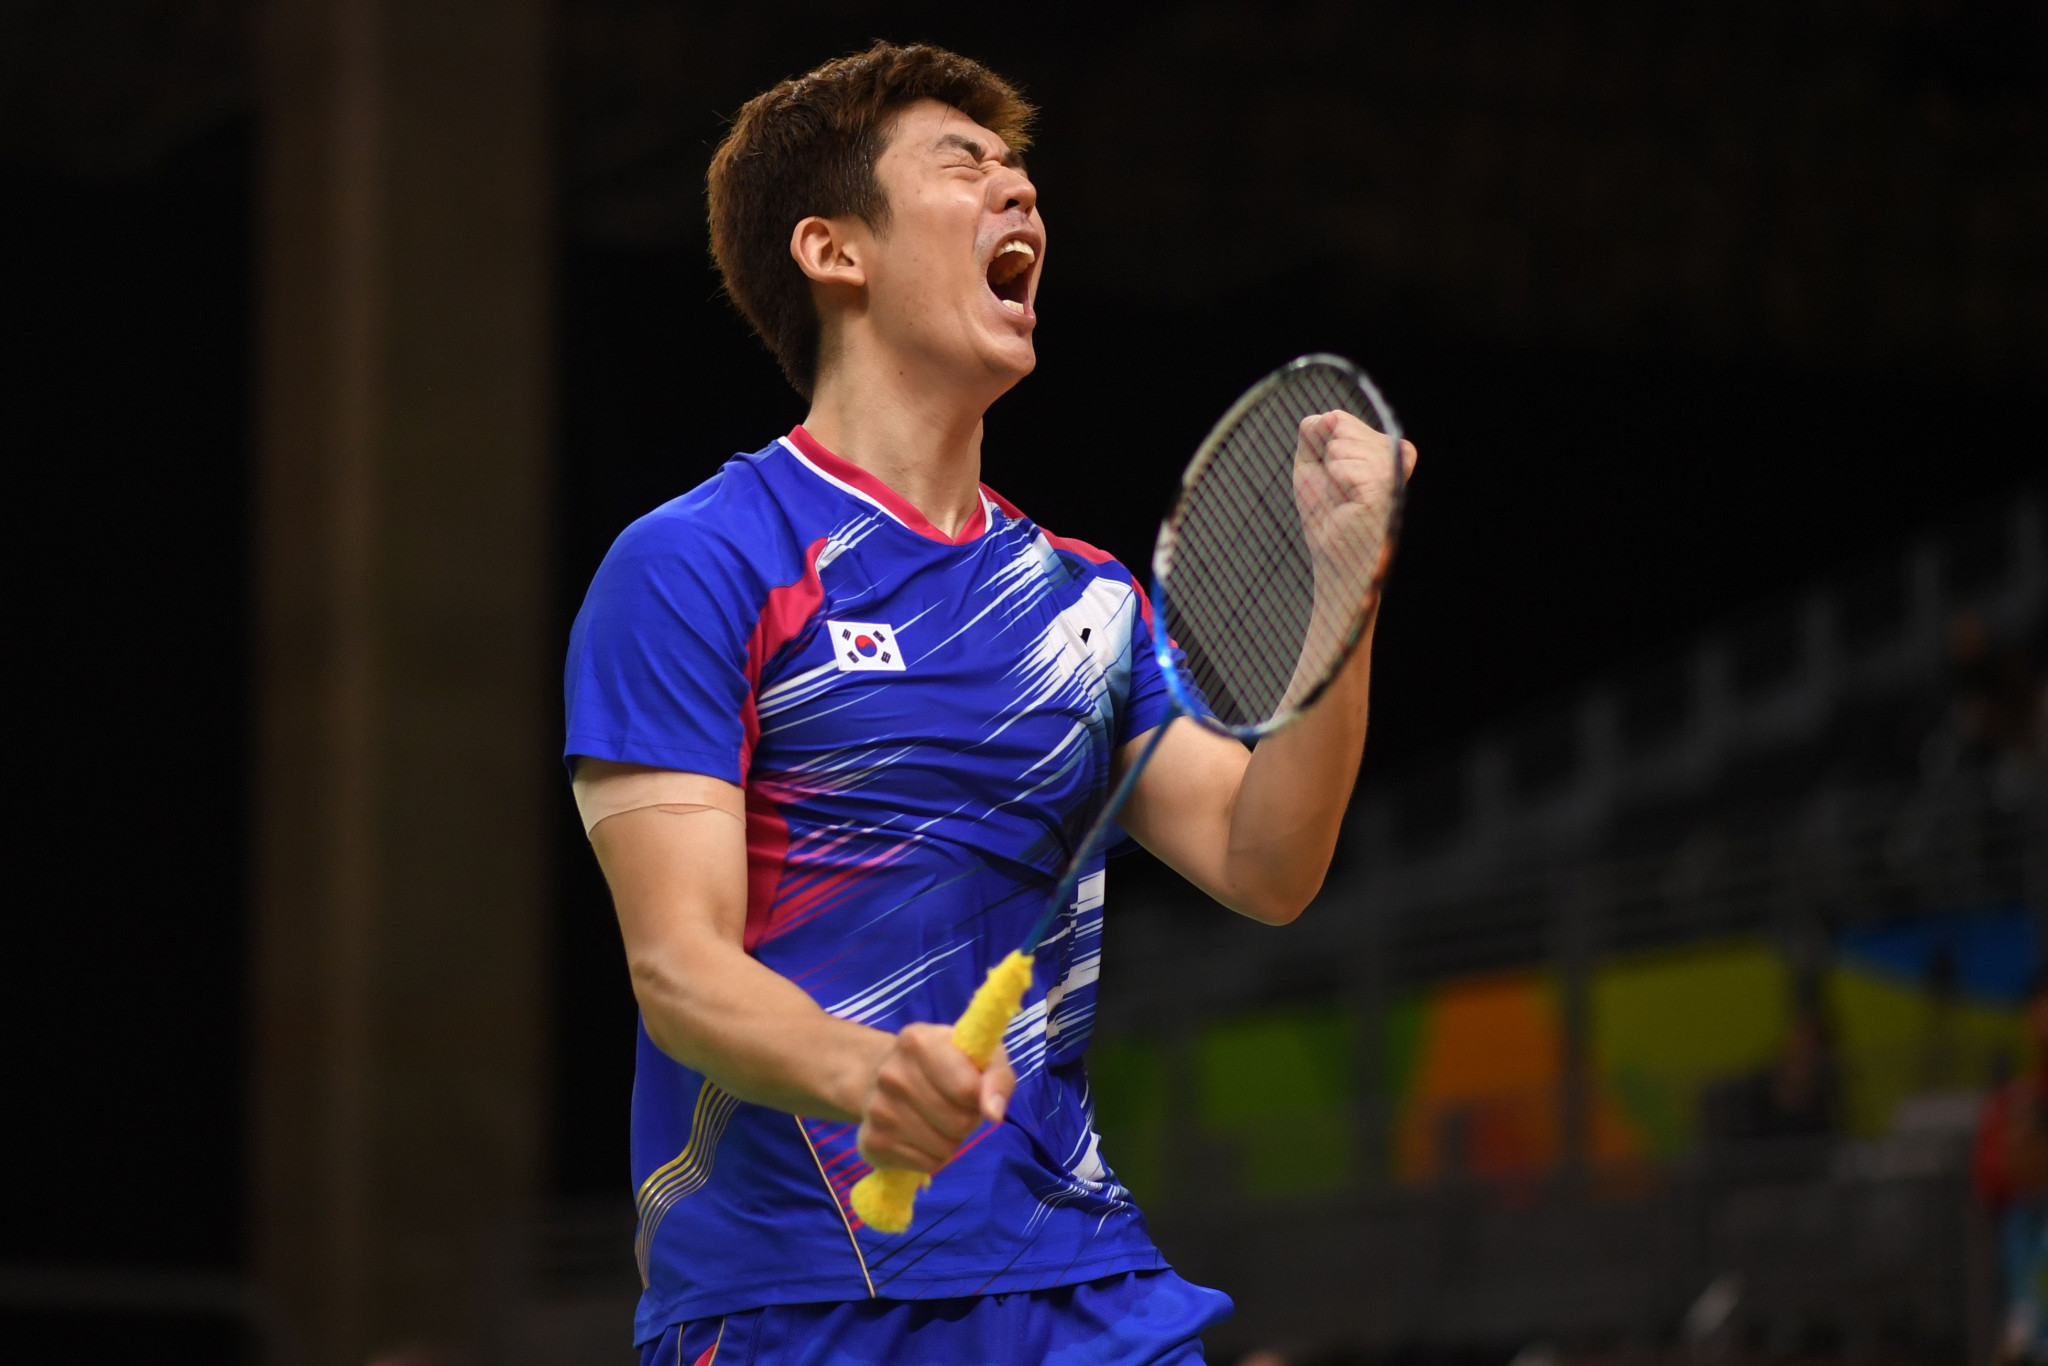  Lee Yong-dae's positive COVID-19 test resulted in South Korea's national badminton team undergoing COVID-19 tests ©Getty Images